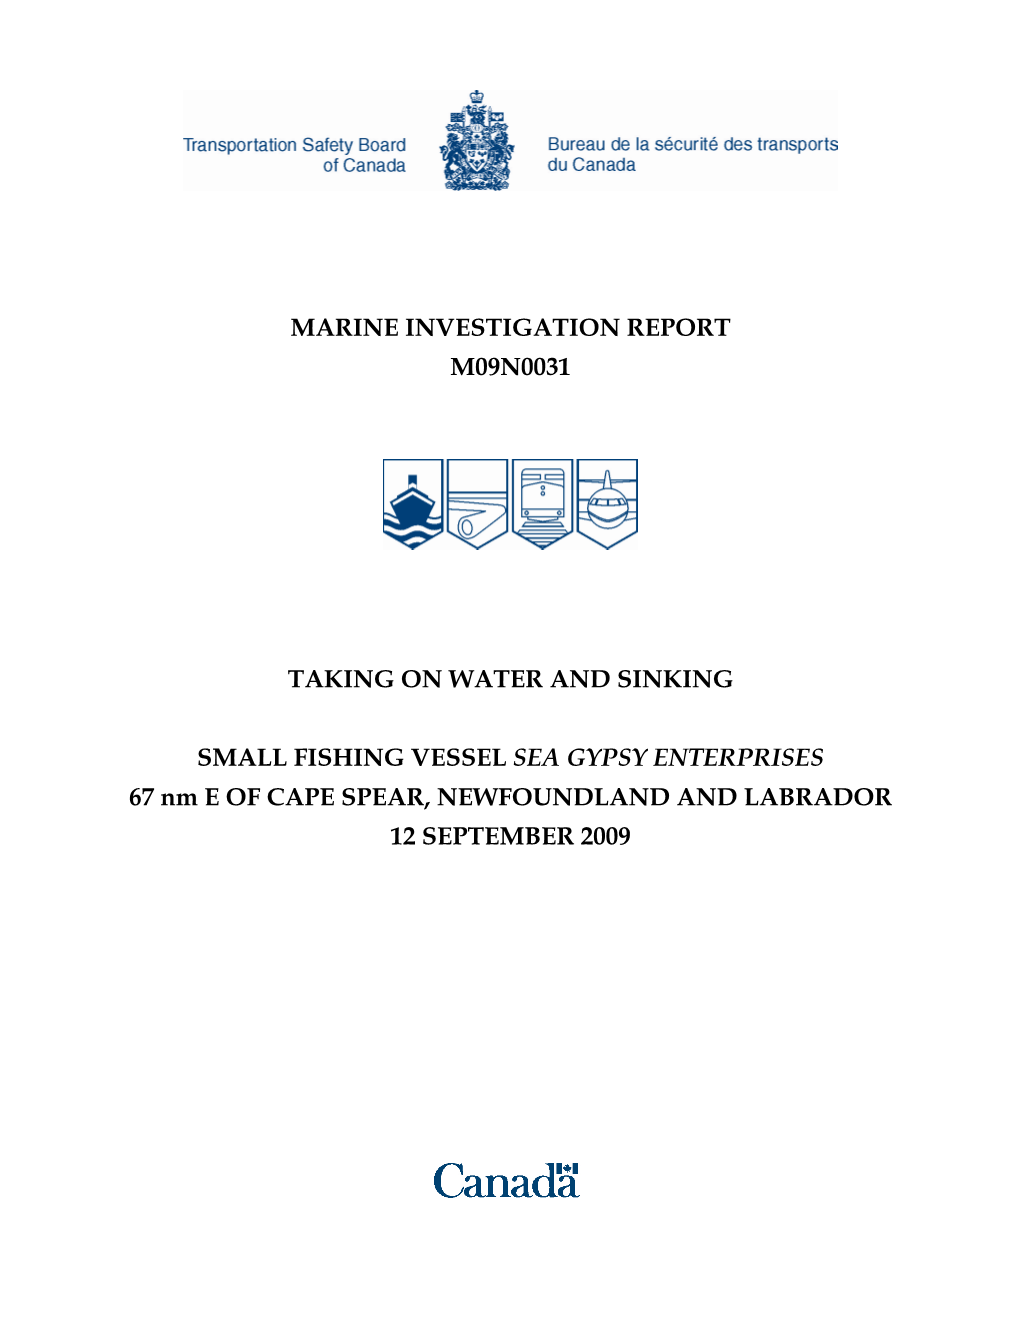 Marine Investigation Report M09n0031 Taking on Water